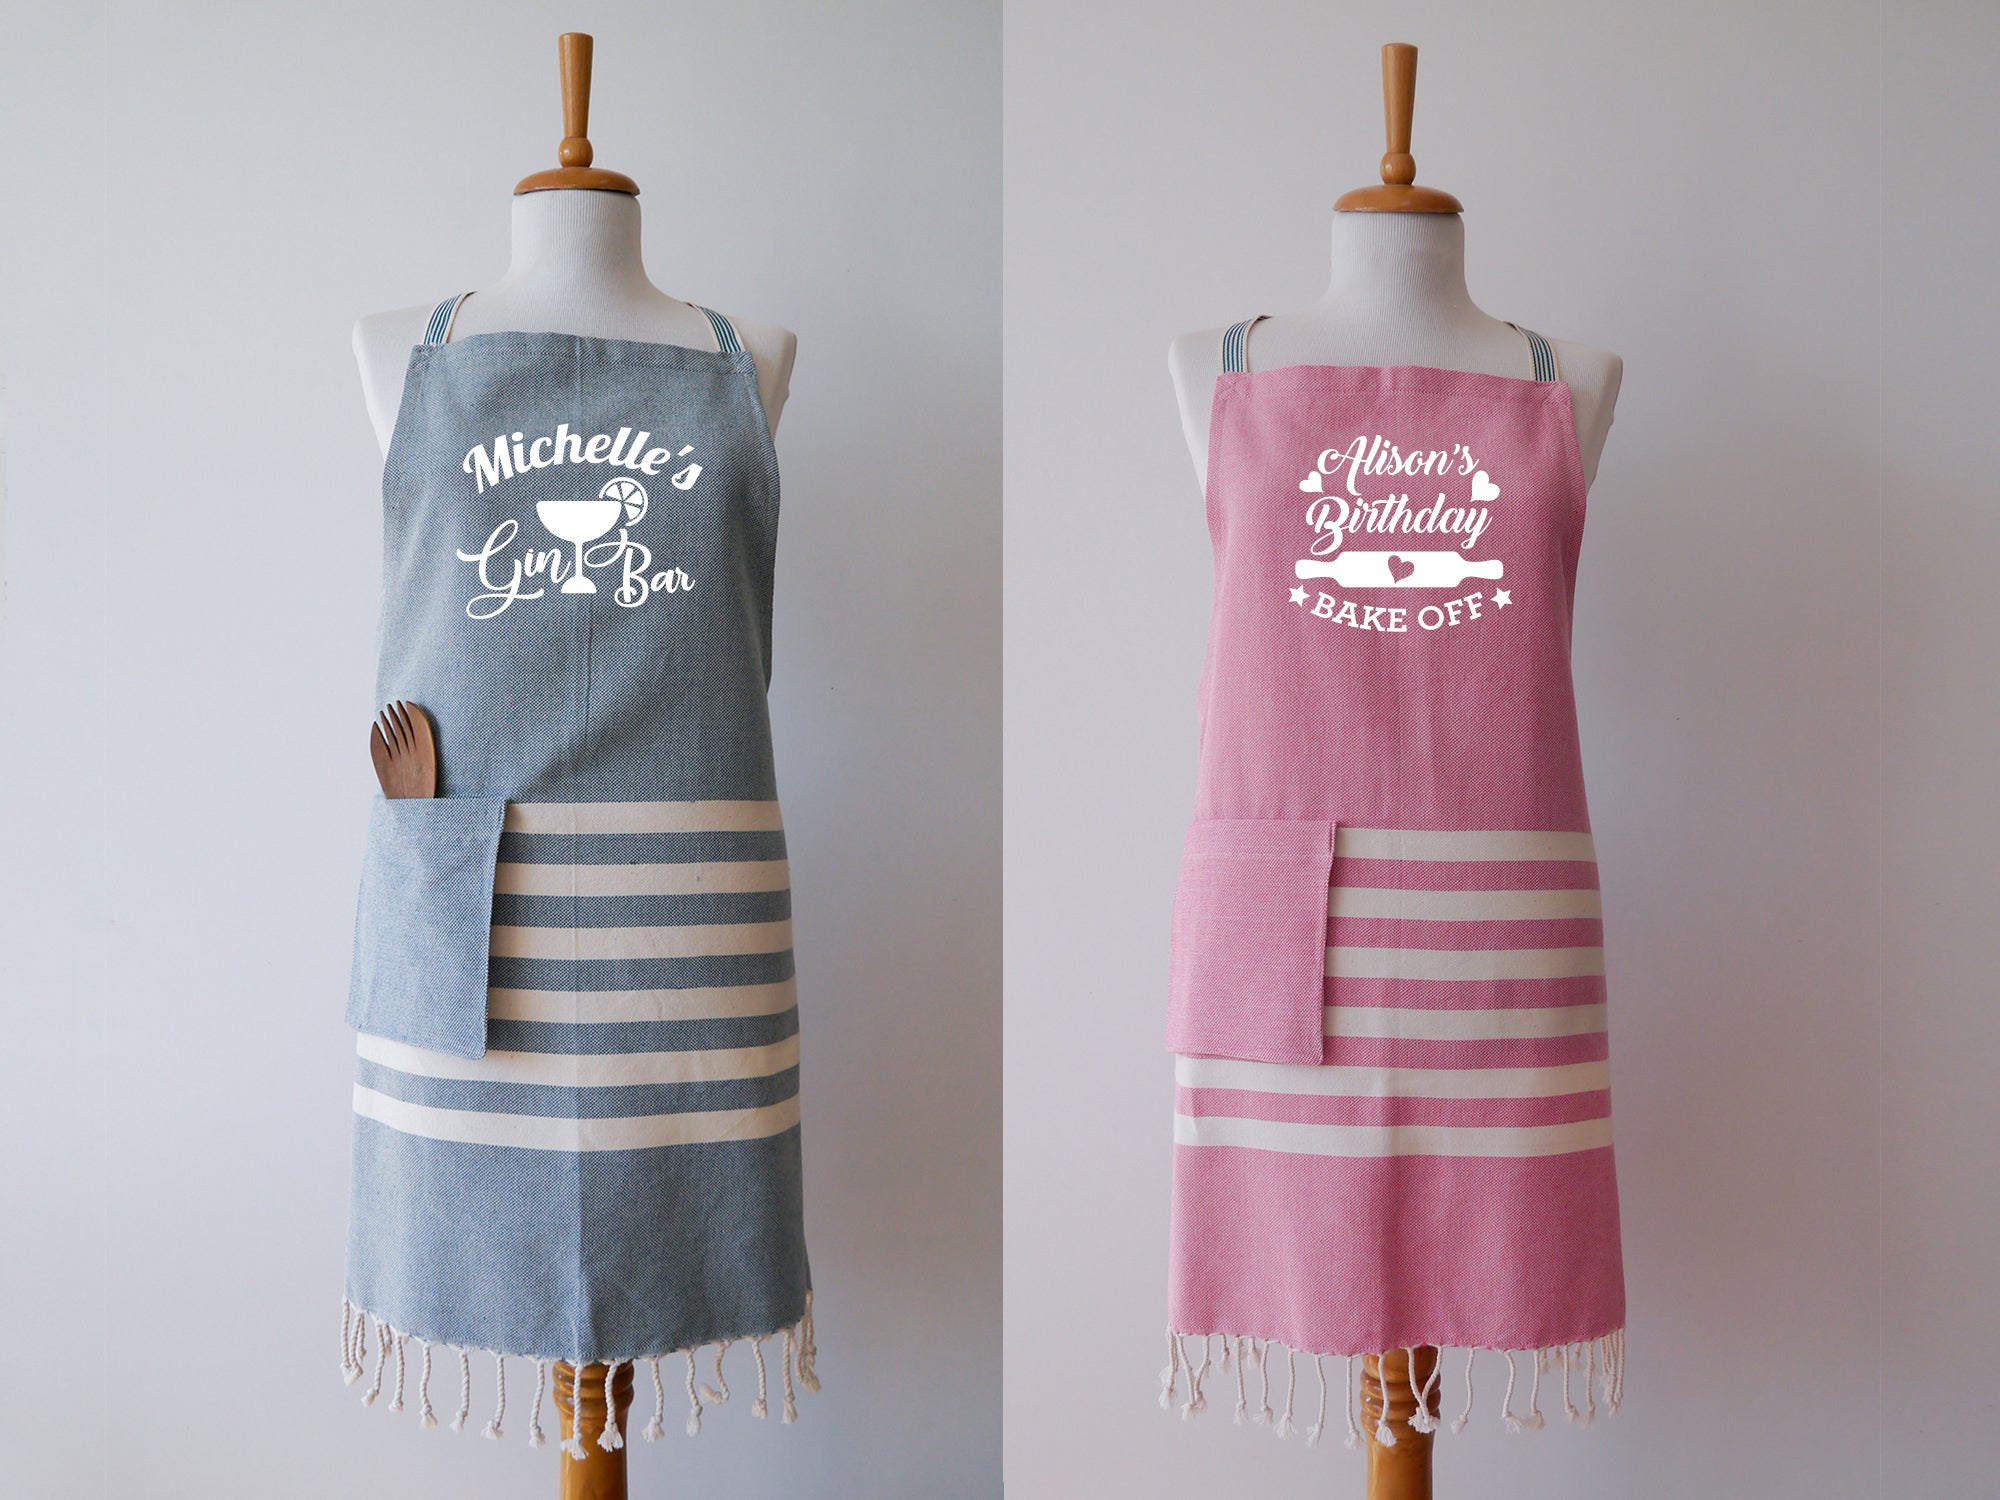 NATURE Personalised Apron and tea towels